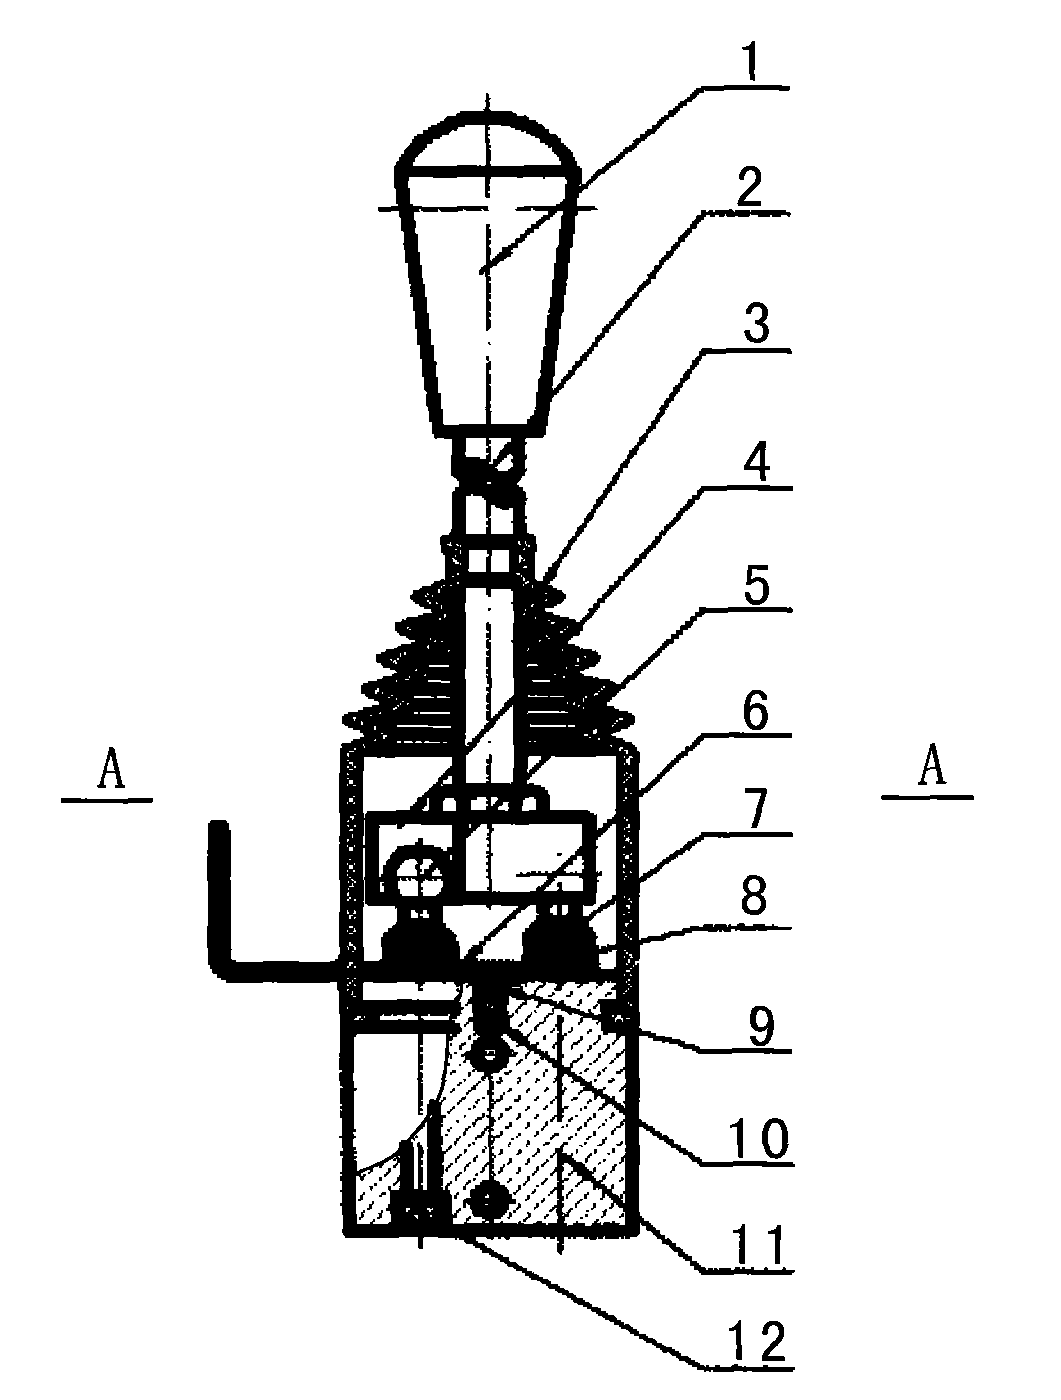 Small-size multi-way valve operating mechanism assembly